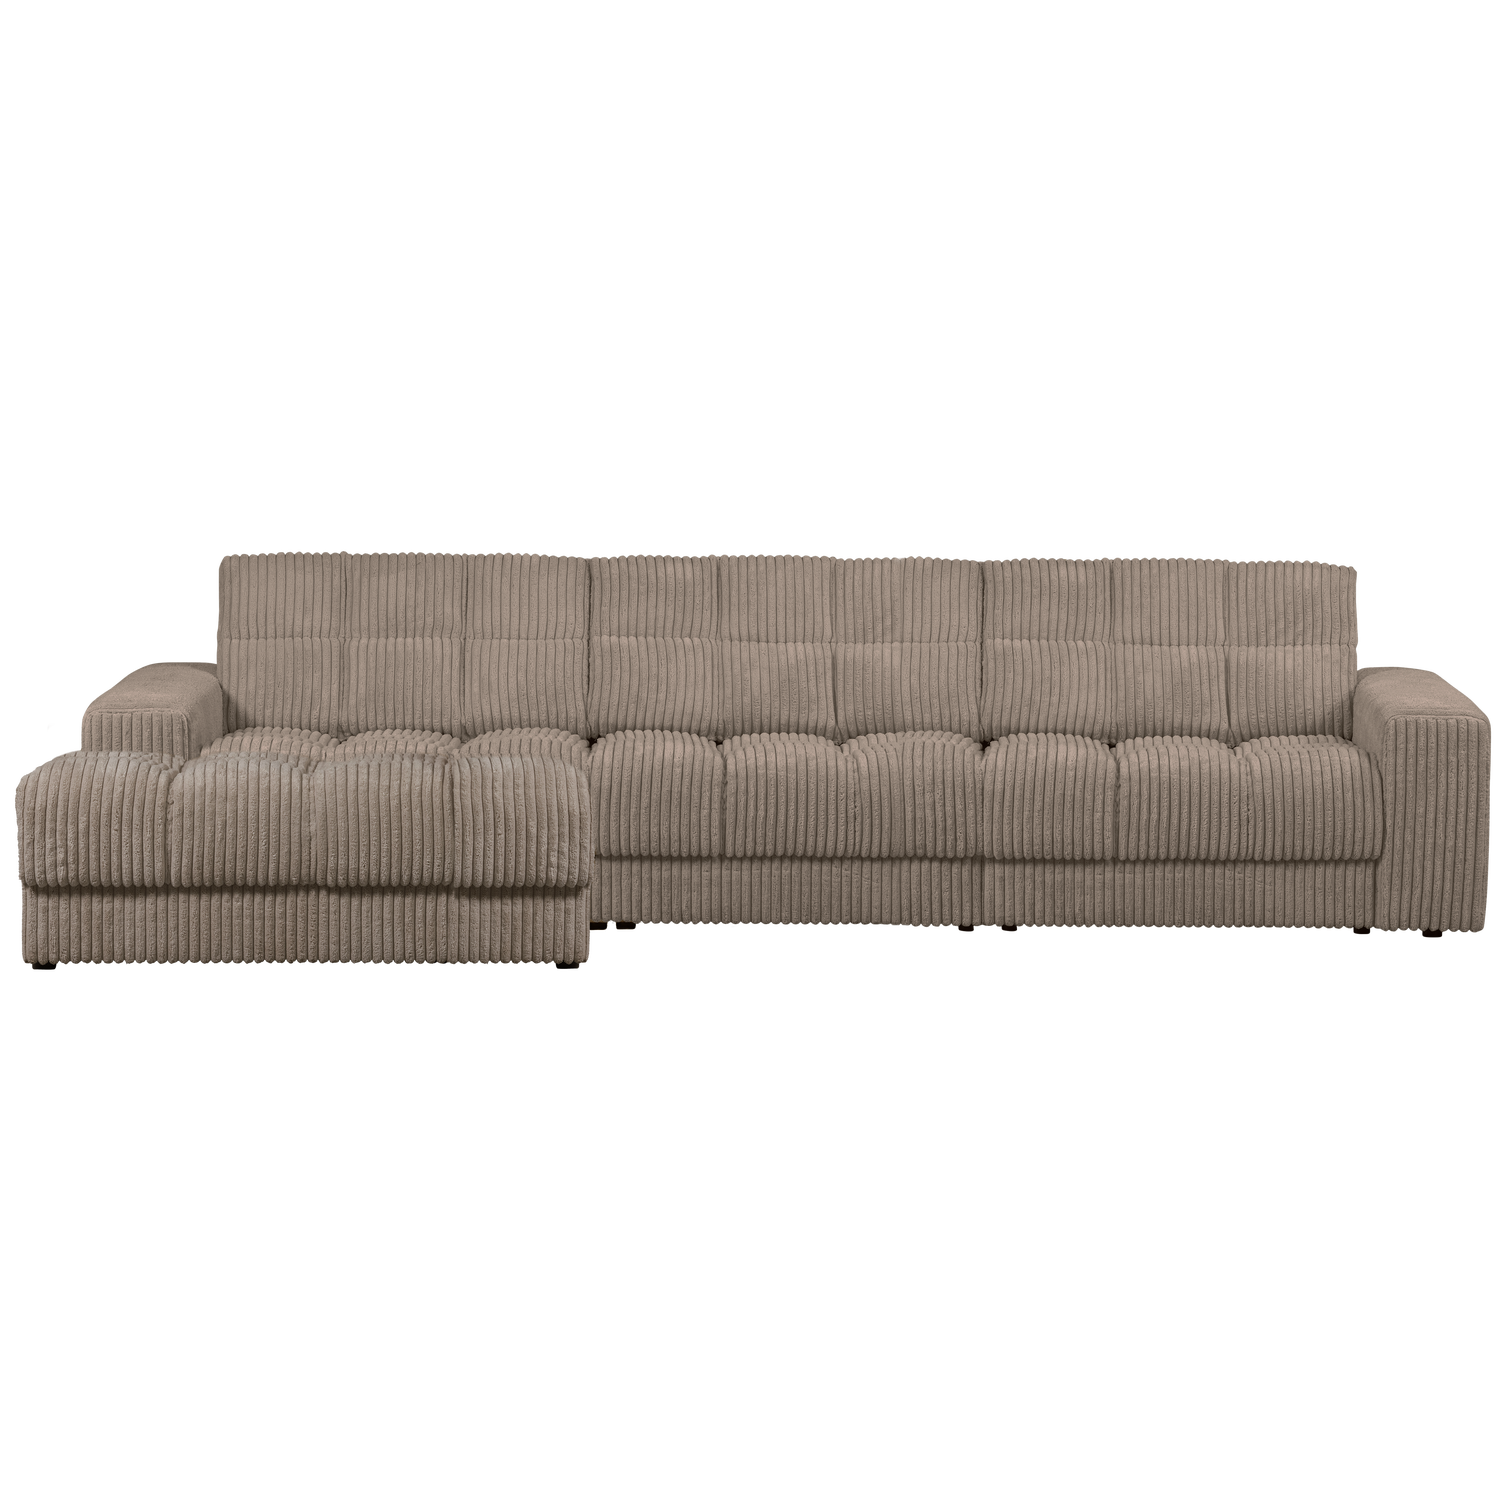 WOOOD Second date chaise longue links grove ribstof mud Bruin|Taupe Bank